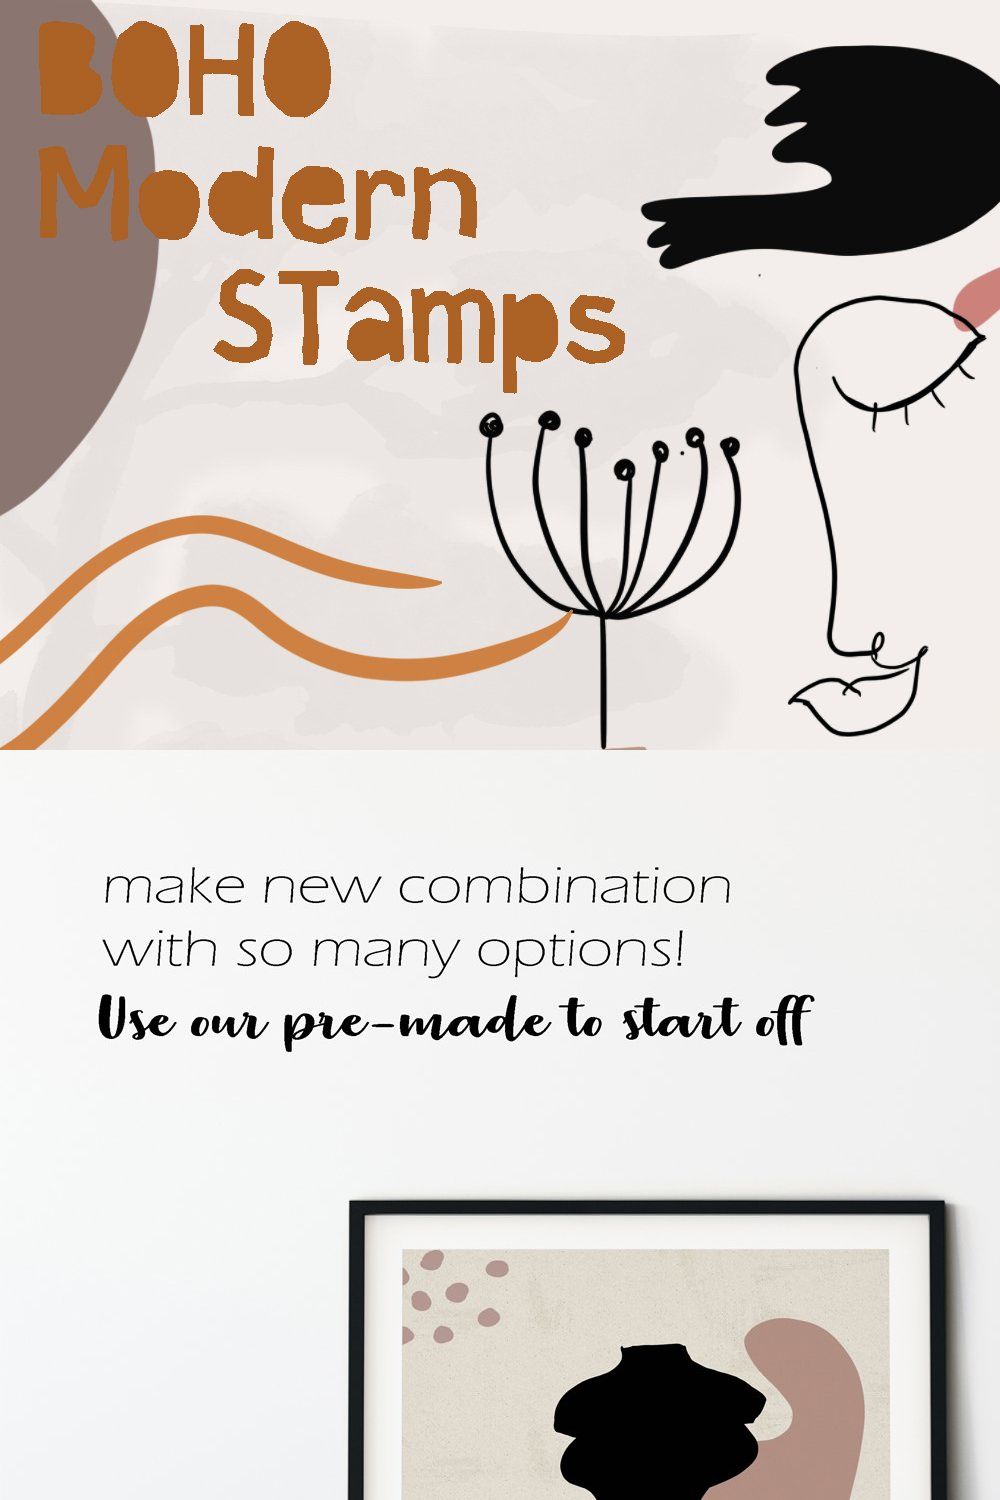 Boho Stamps Photoshop Procreate pinterest preview image.